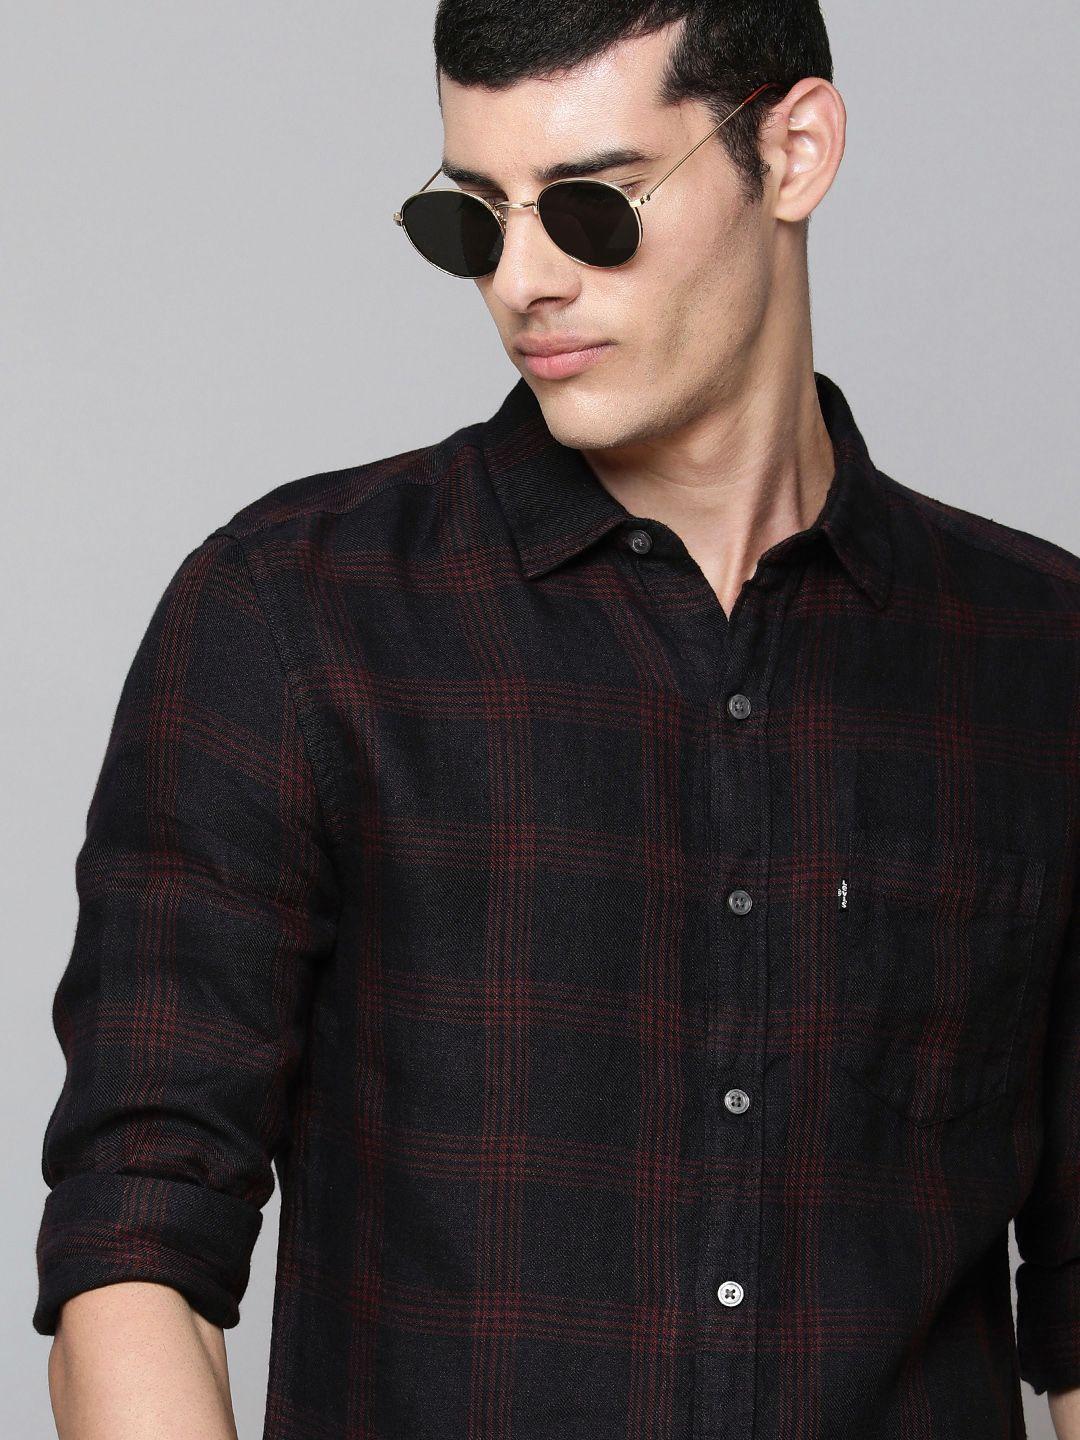 levis men black and red slim fit grid tattersall checked casual linen shirt